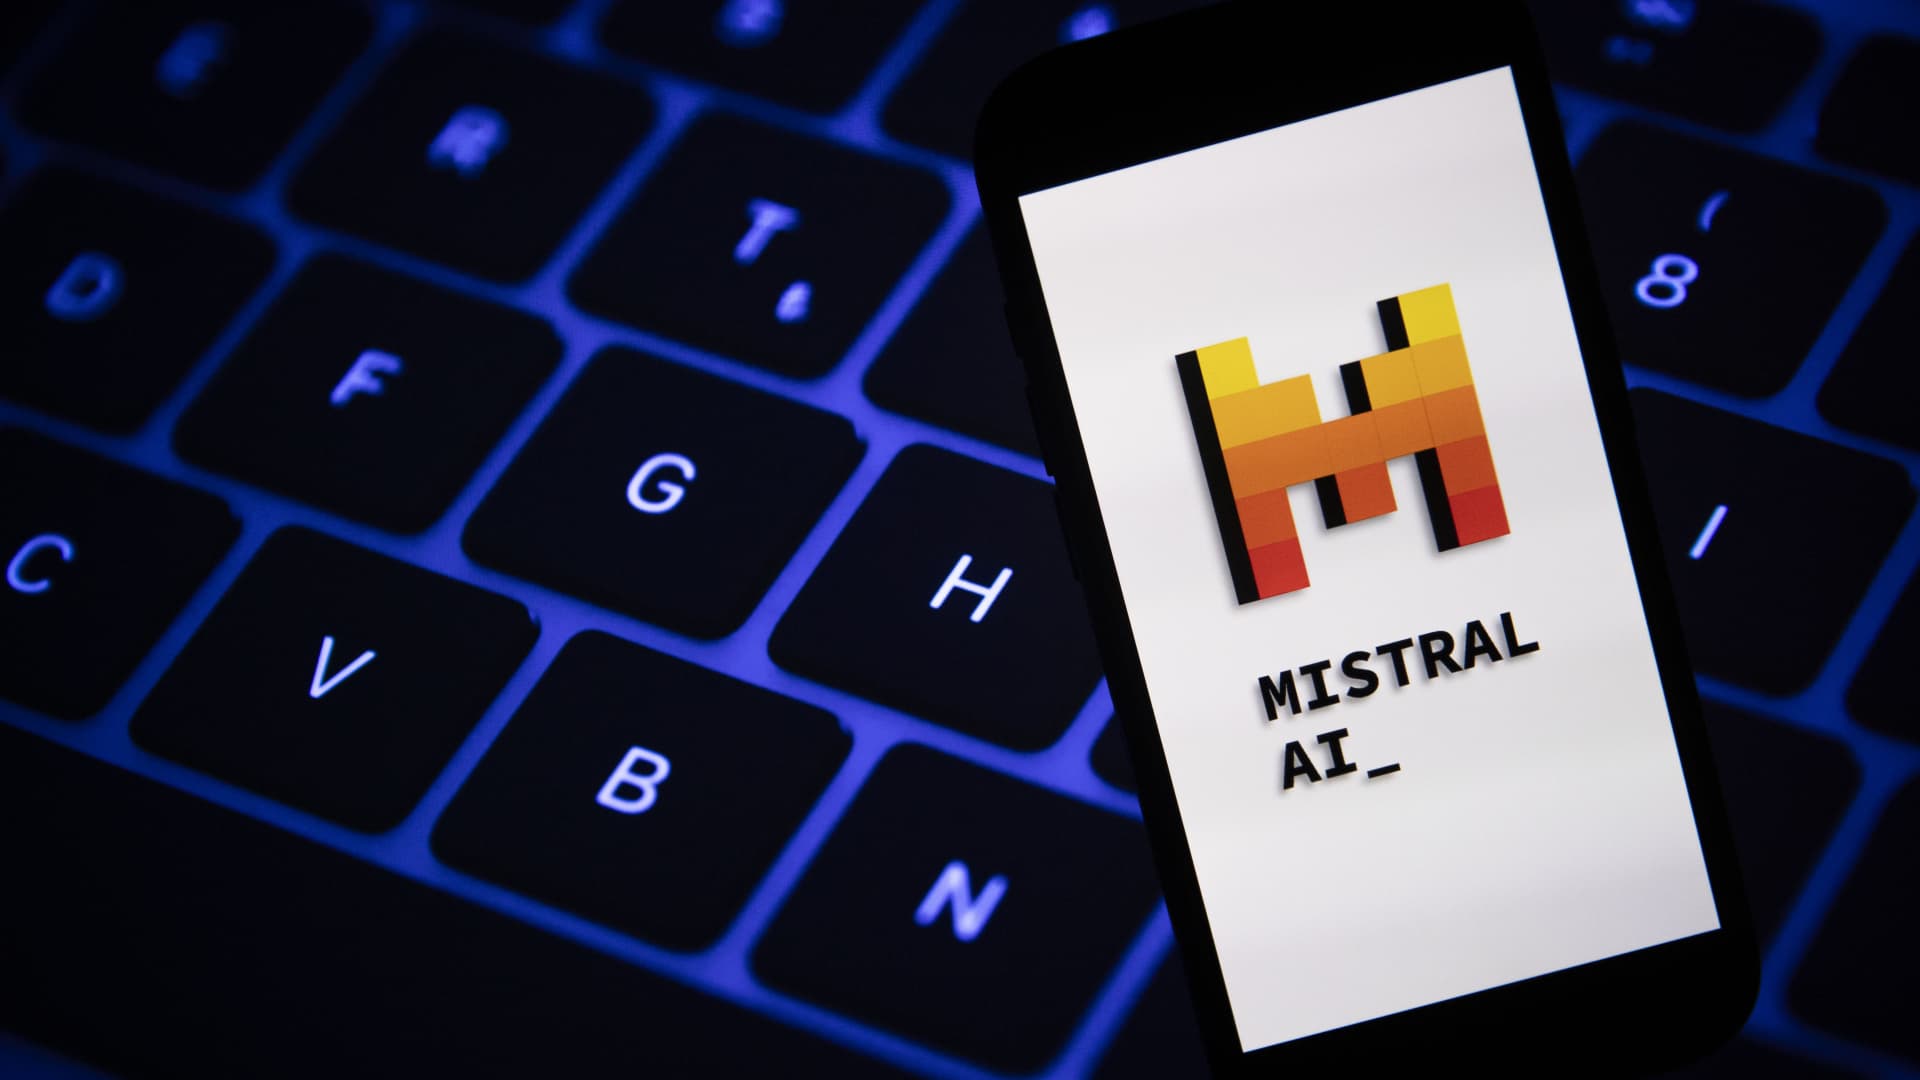 Microsoft’s $16 Million Investment In Mistral AI Unveiled